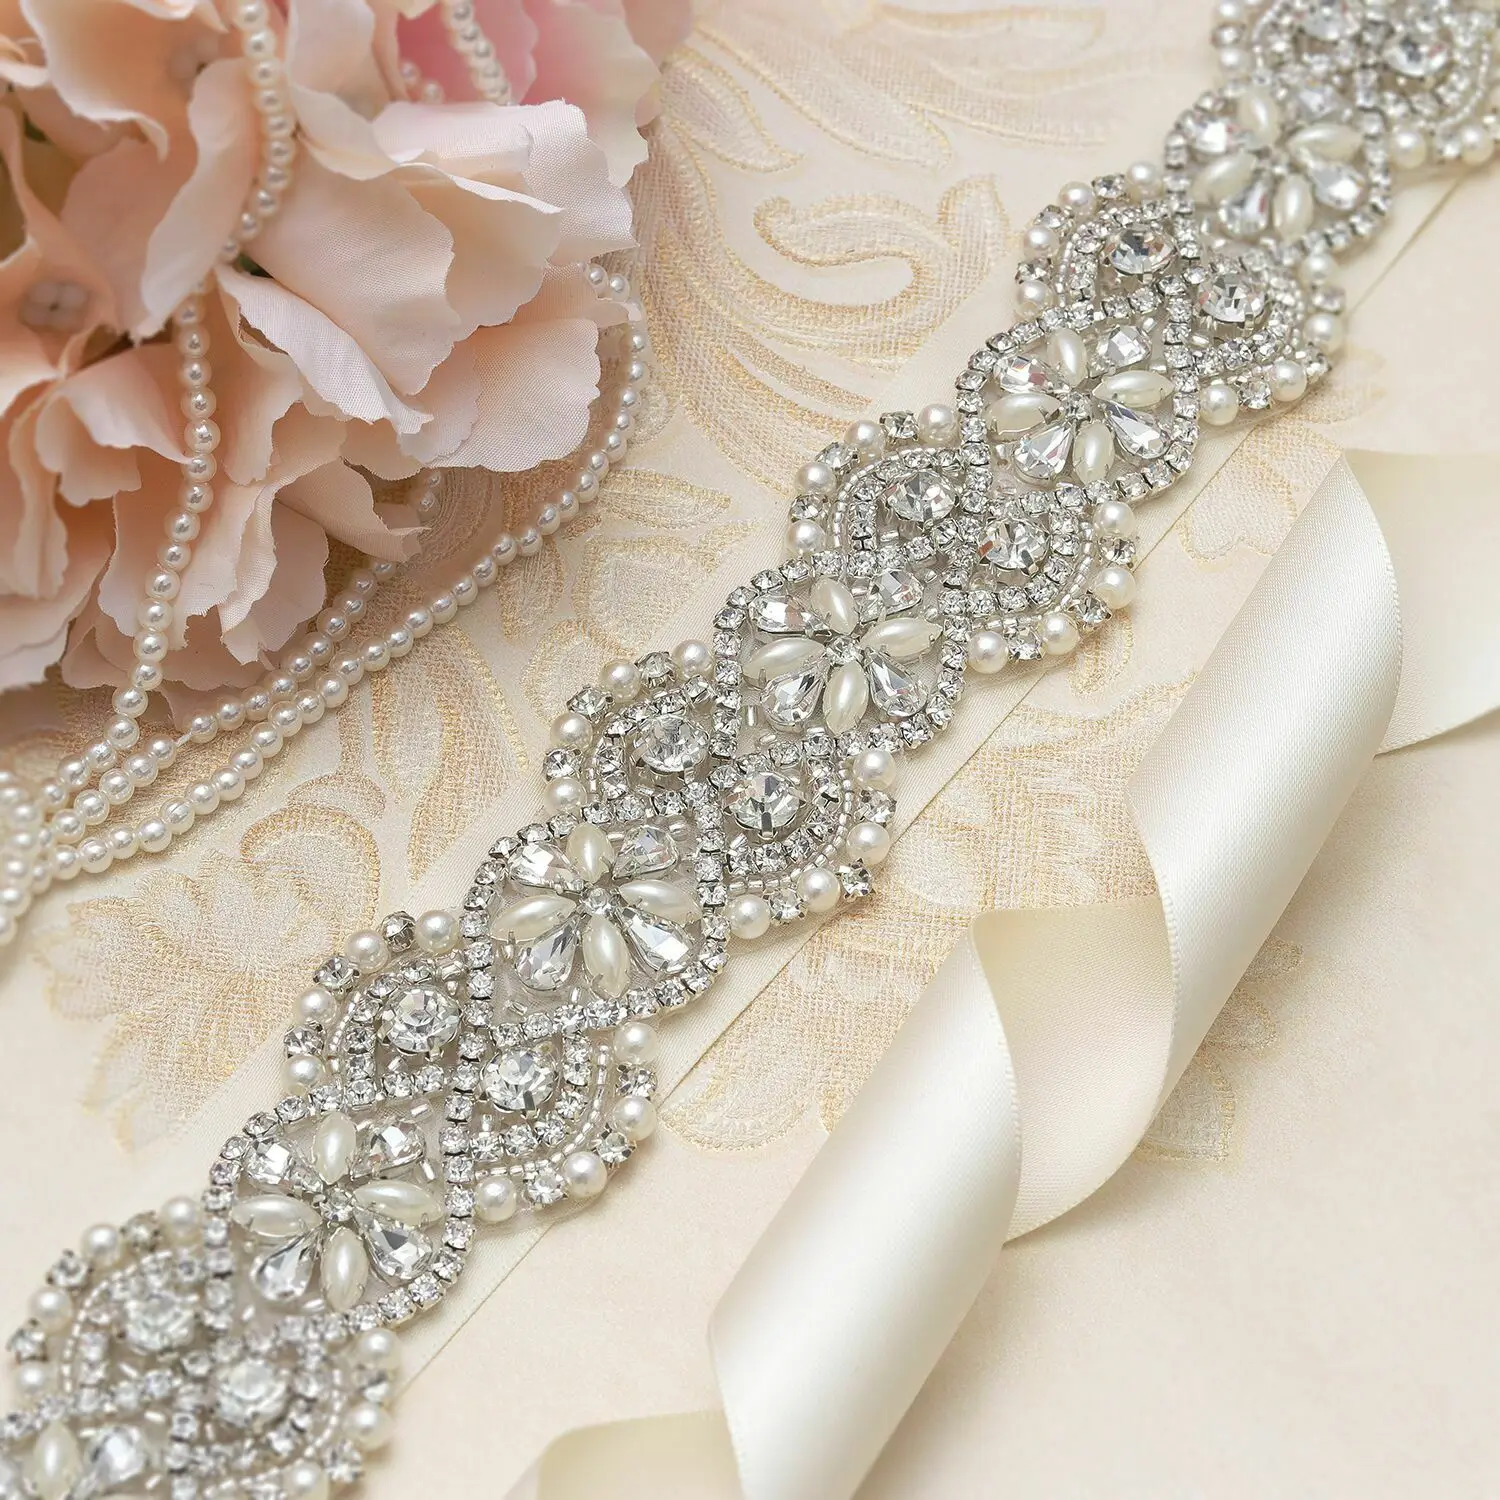 

keering stock hot sale clear pearl flower sash rhinestone applique belt for bridal dress WRA-363, Clear stone